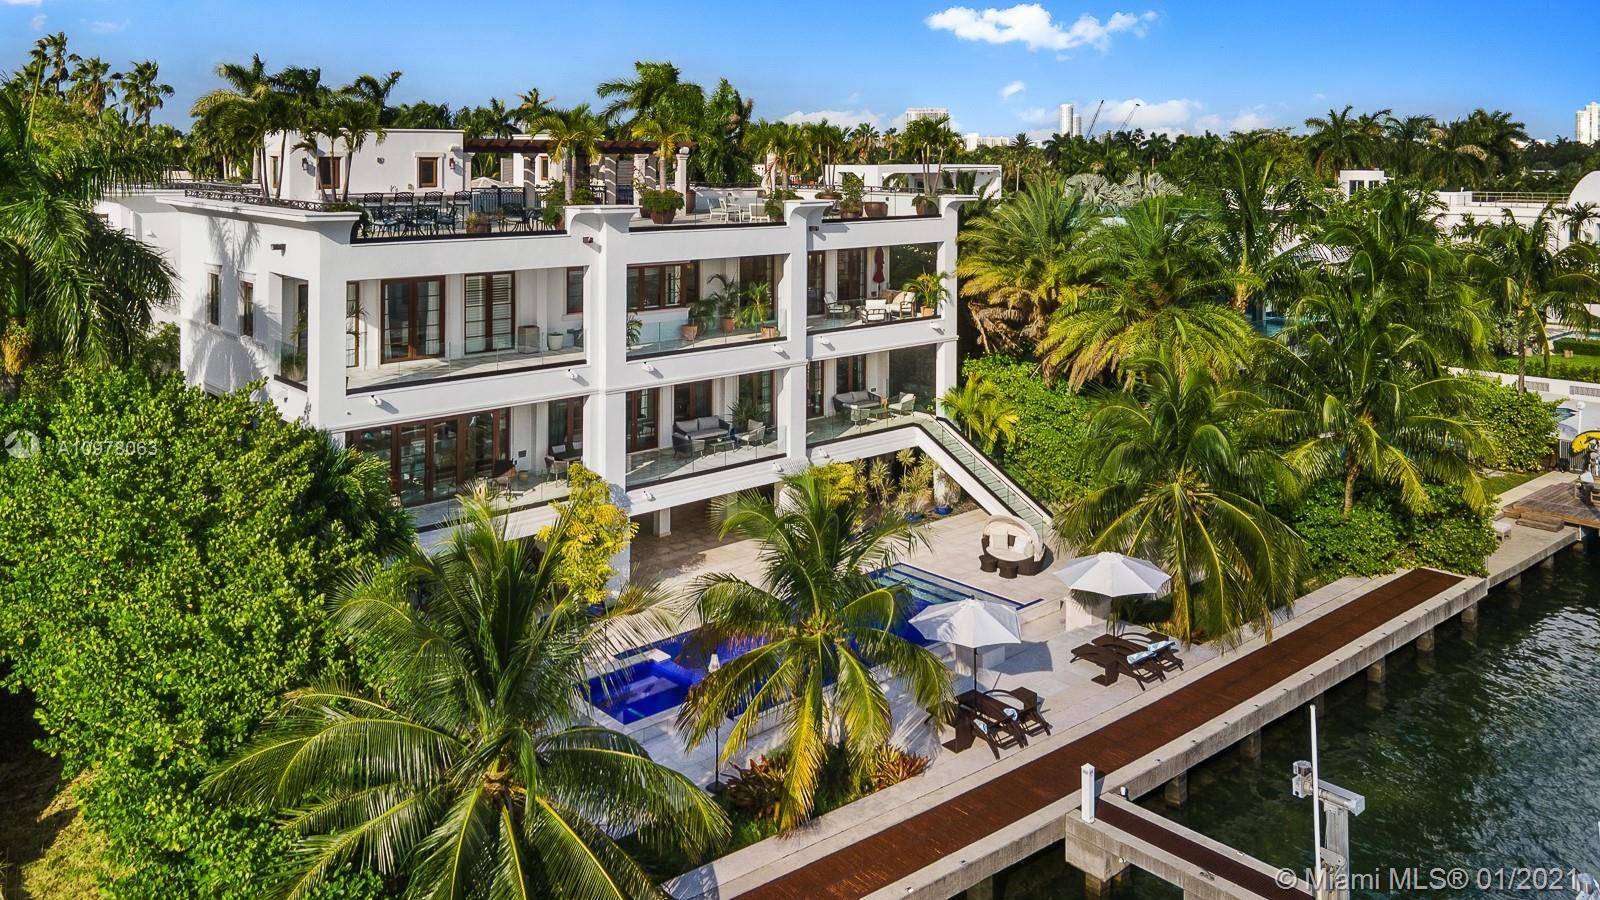 Enjoy Miami s best views from this distinguished 3 story, waterfront estate on exclusive, guard gated Palm Island.